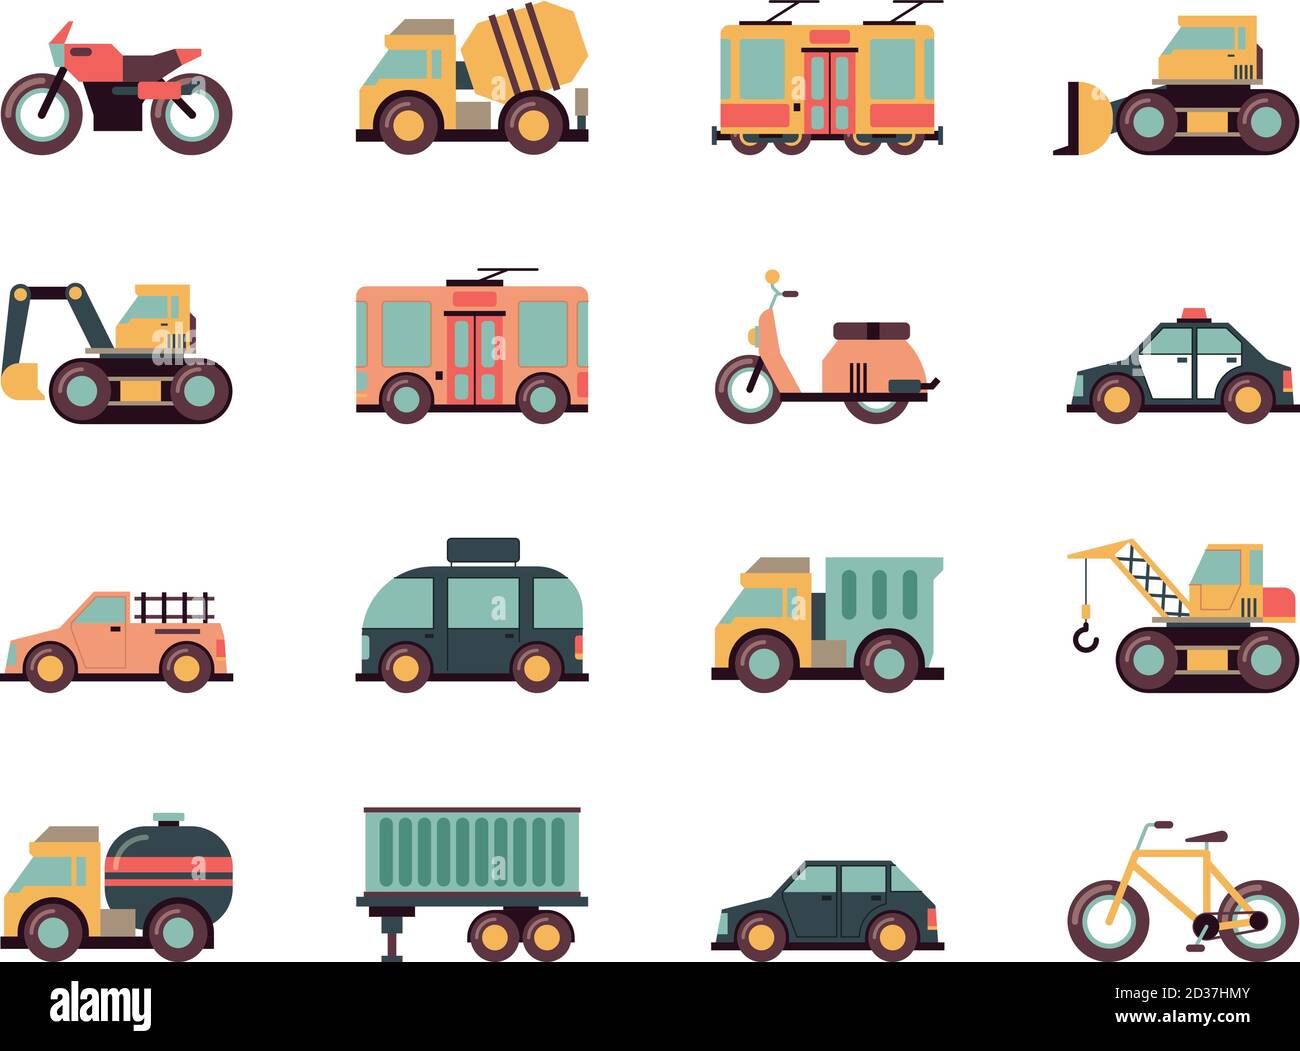 Transport flat icons. Urban vehicles cars buses airplane fuel transportation vector colored symbols Stock Vector